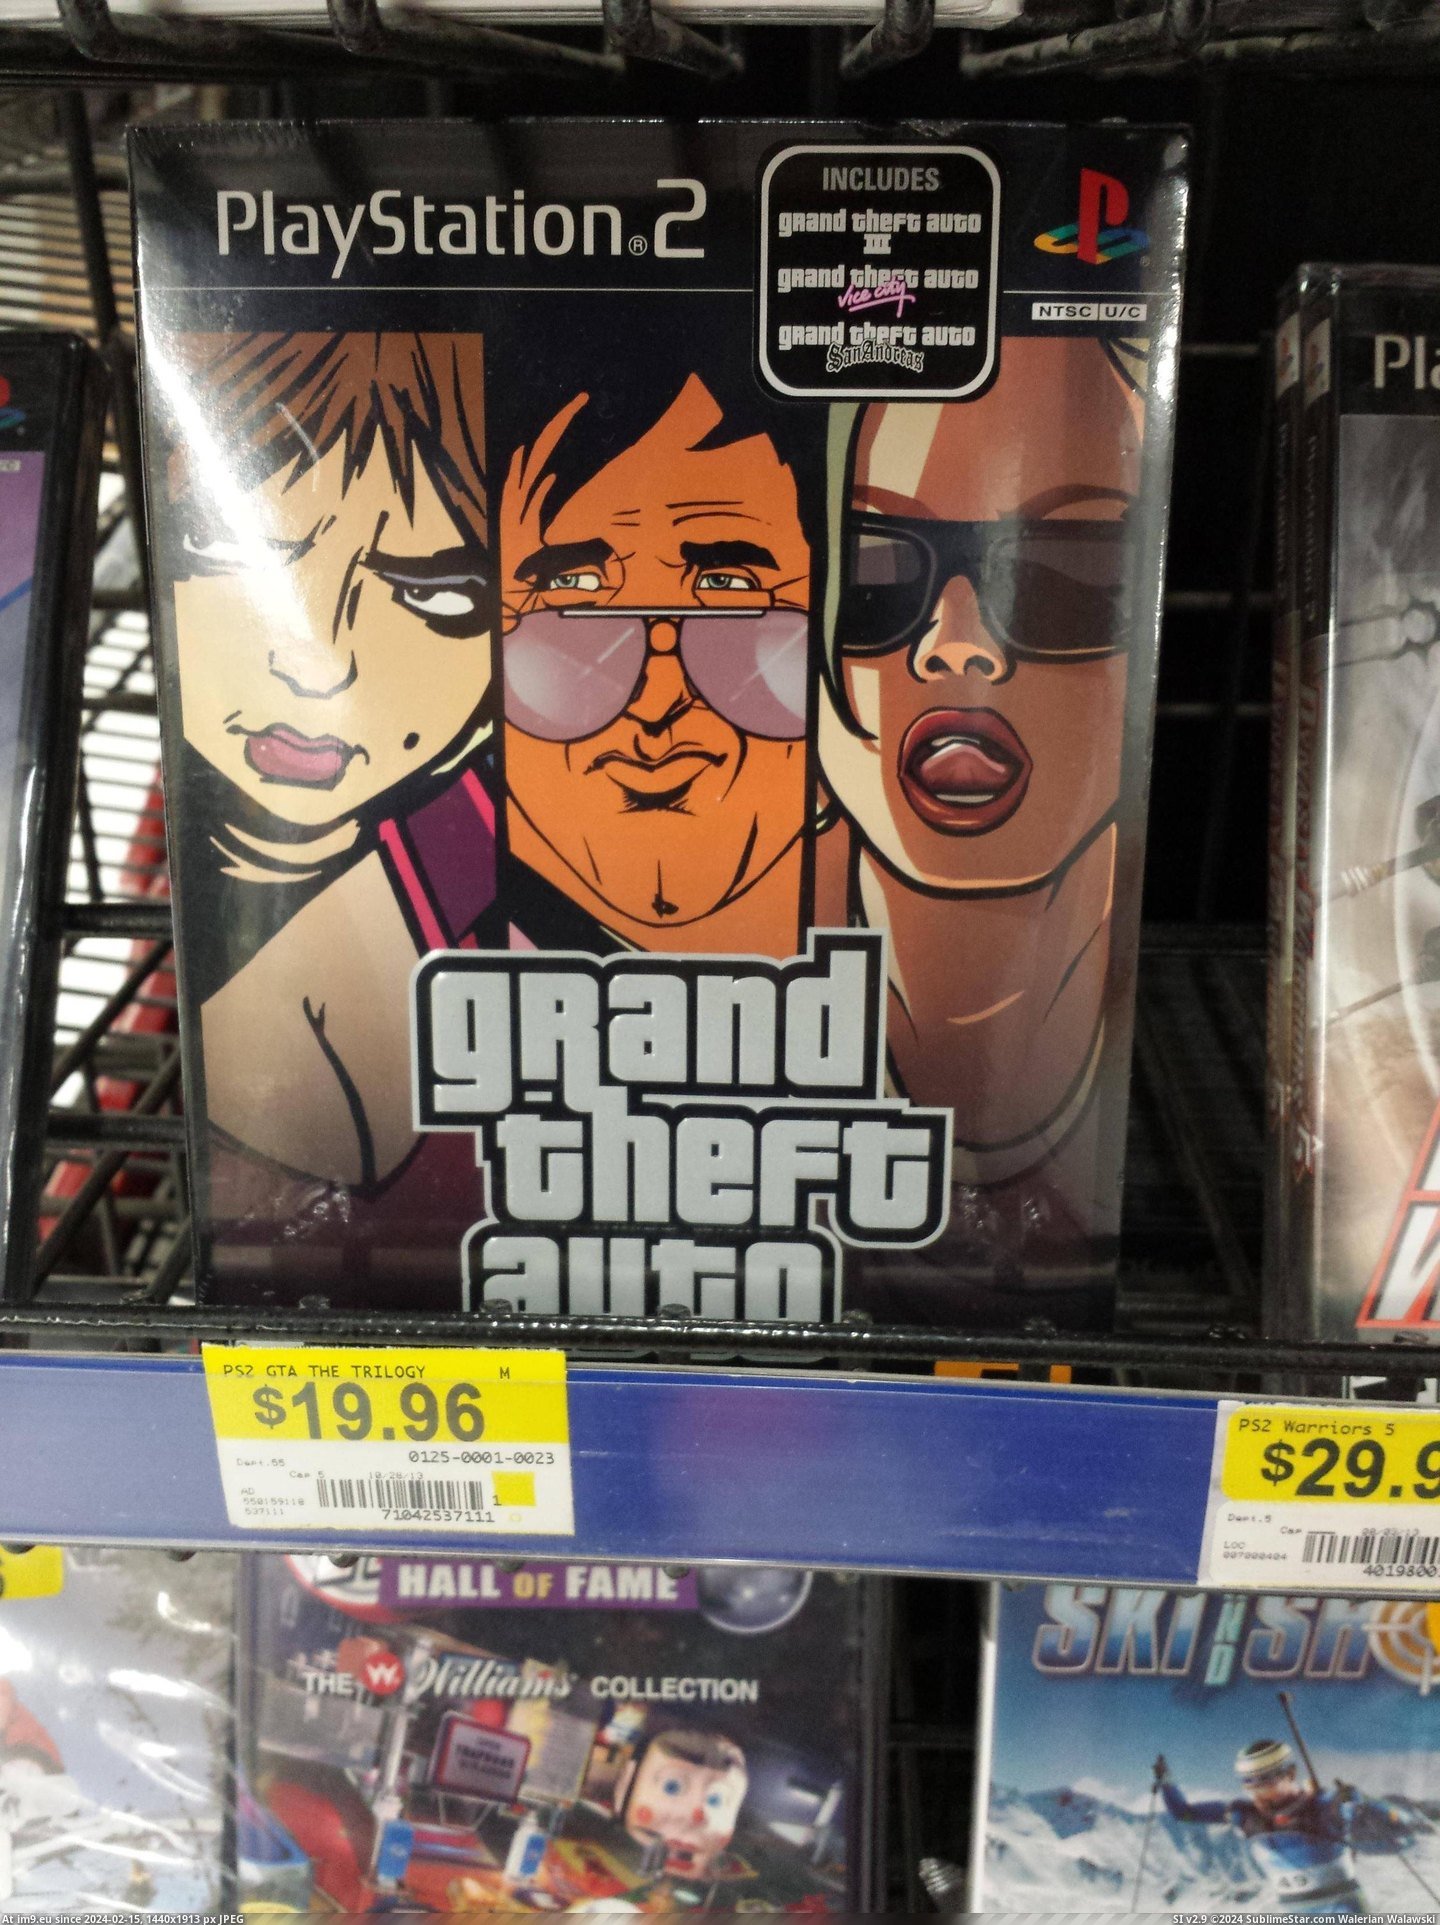 #Gaming #Games #Sold #Wal #Mart #Texas #Ps2 [Gaming] At a Wal-Mart in Texas. Didn't know ps2 games were still sold. Pic. (Obraz z album My r/GAMING favs))